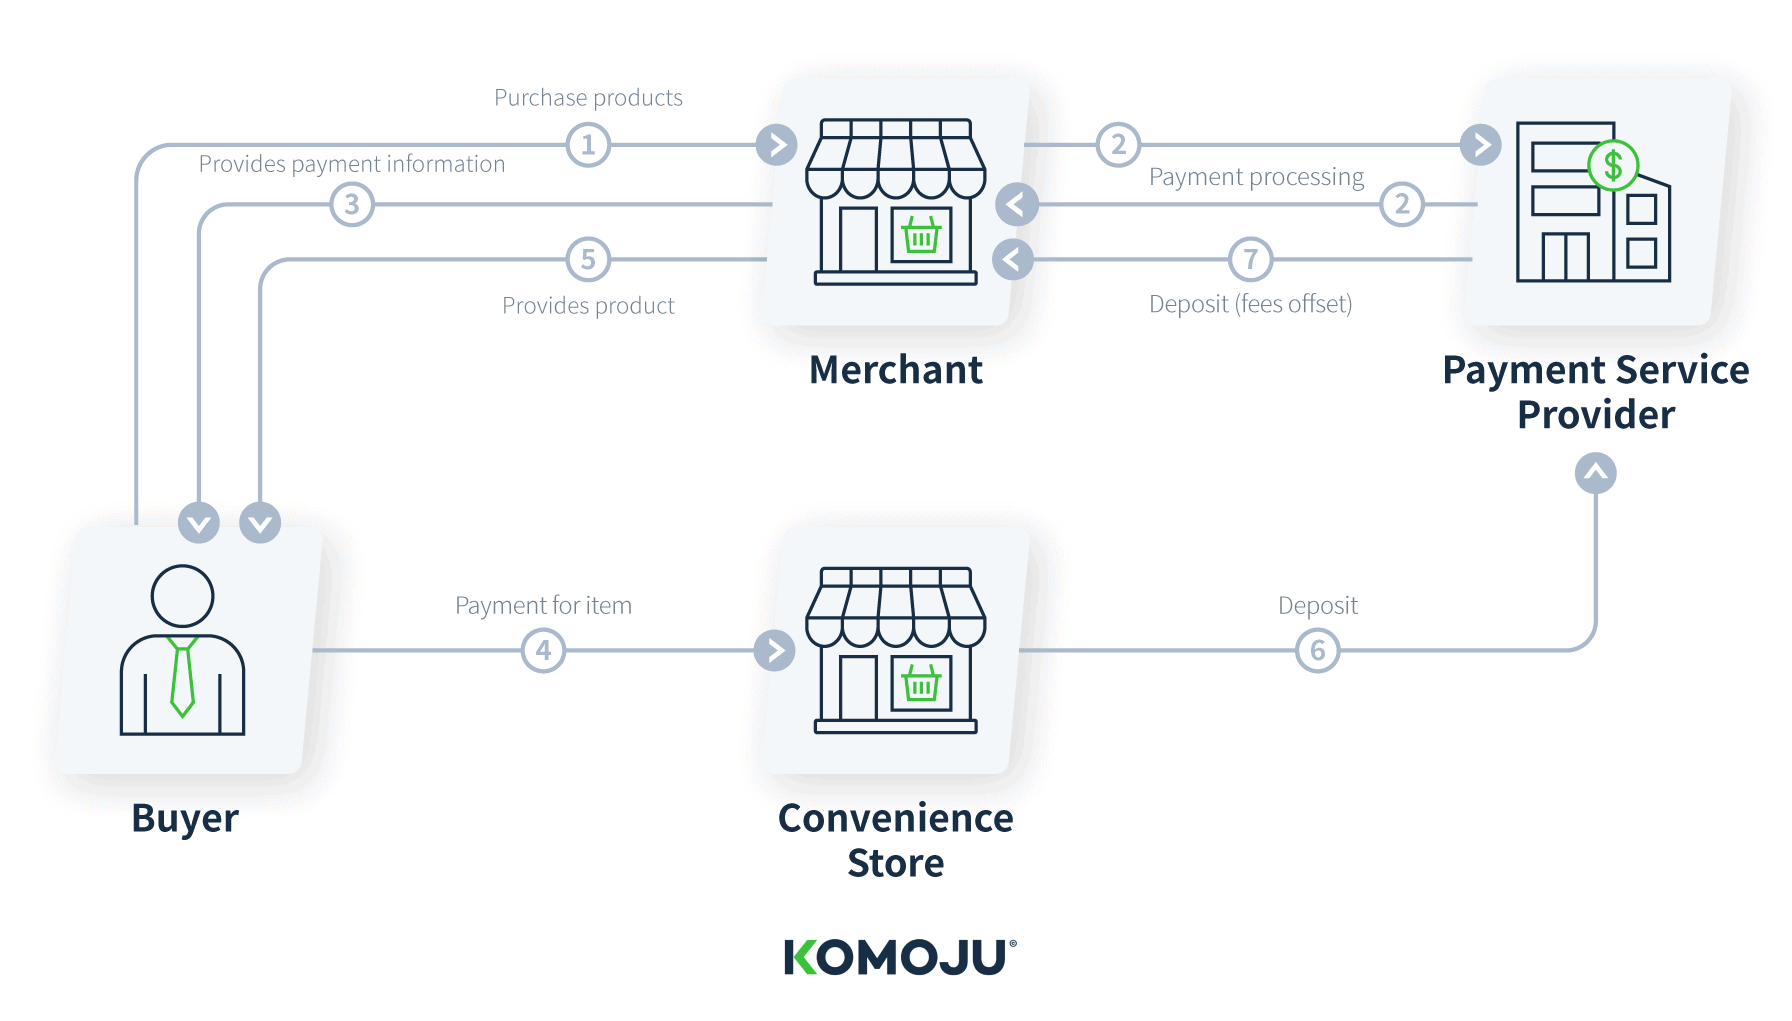 The process for konbini payment